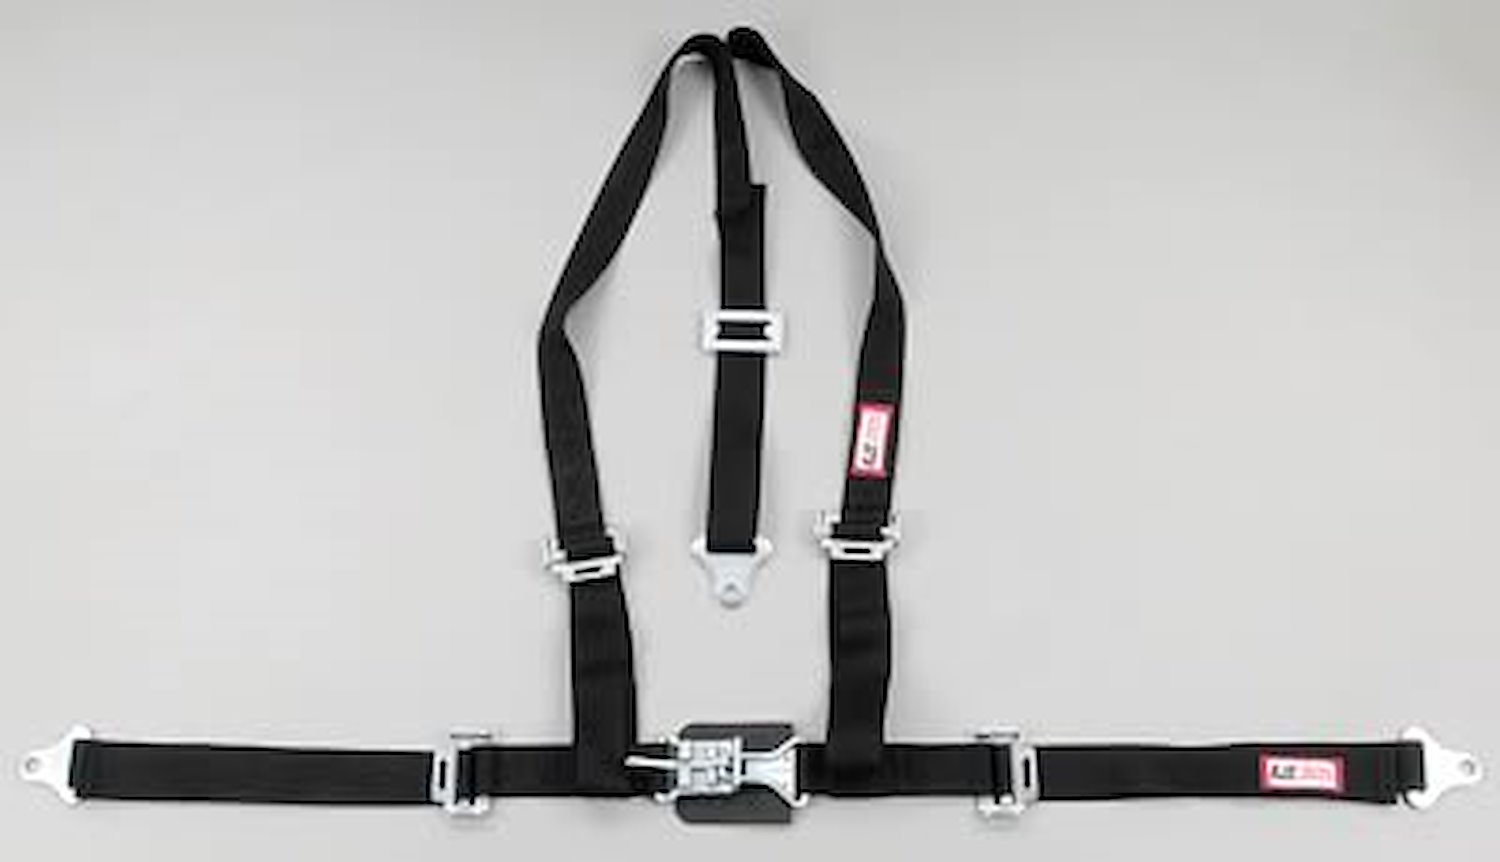 NON-SFI L&L HARNESS 2 PULL DOWN Lap Belt w/Adjuster 2 S.H. Individual FLOOR Mount ALL WRAP ENDS BLUE